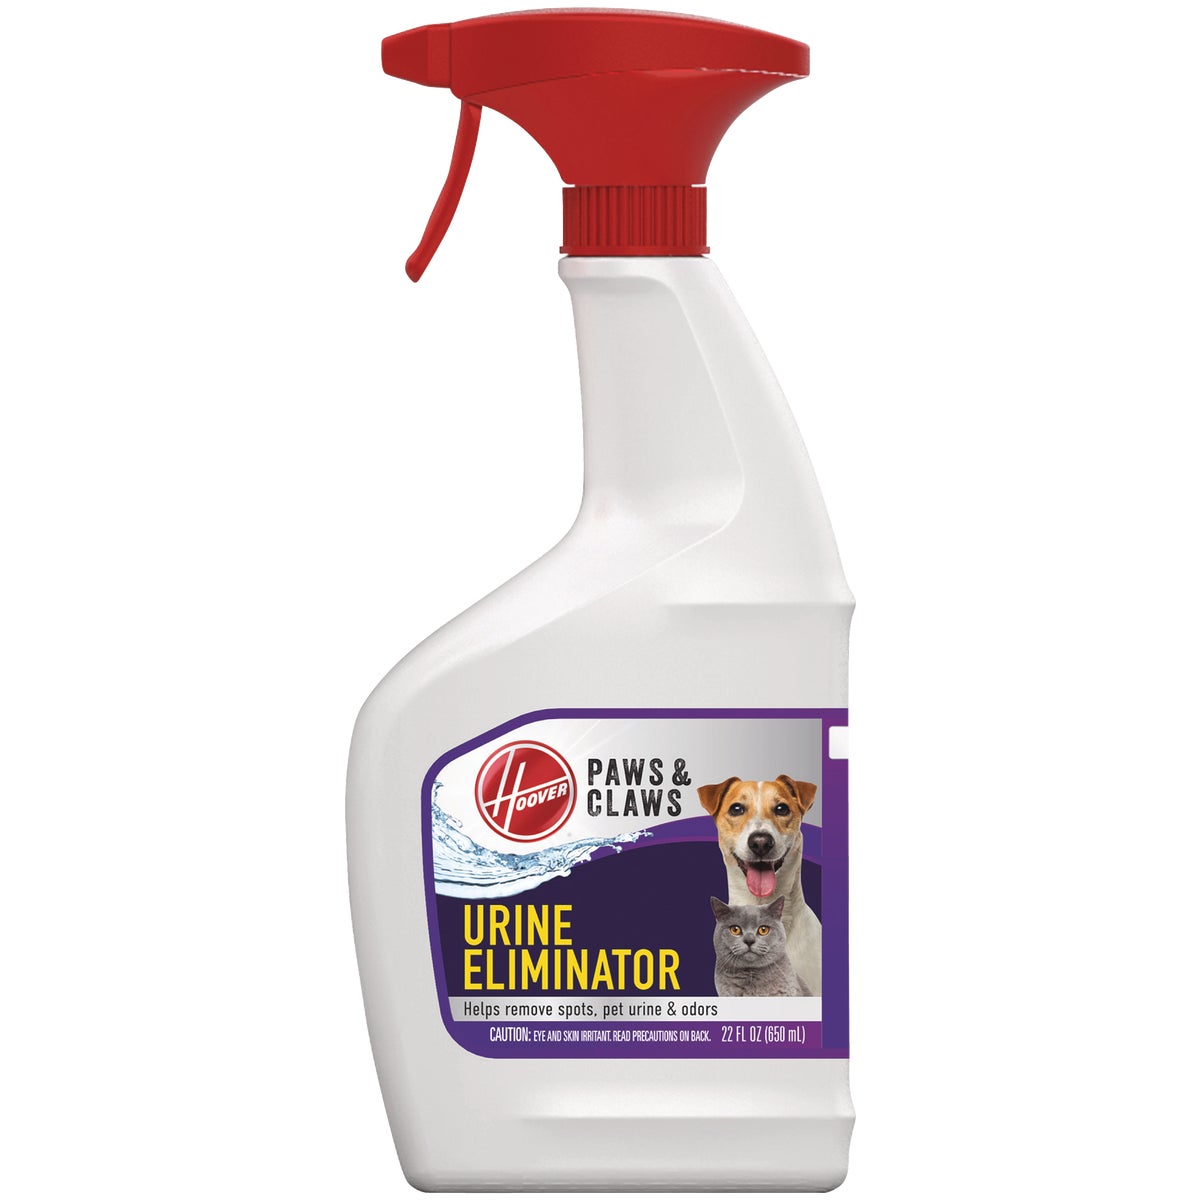 Hoover Paws & Claws Oxy Pet Urine Eliminator & Carpet Cleaner